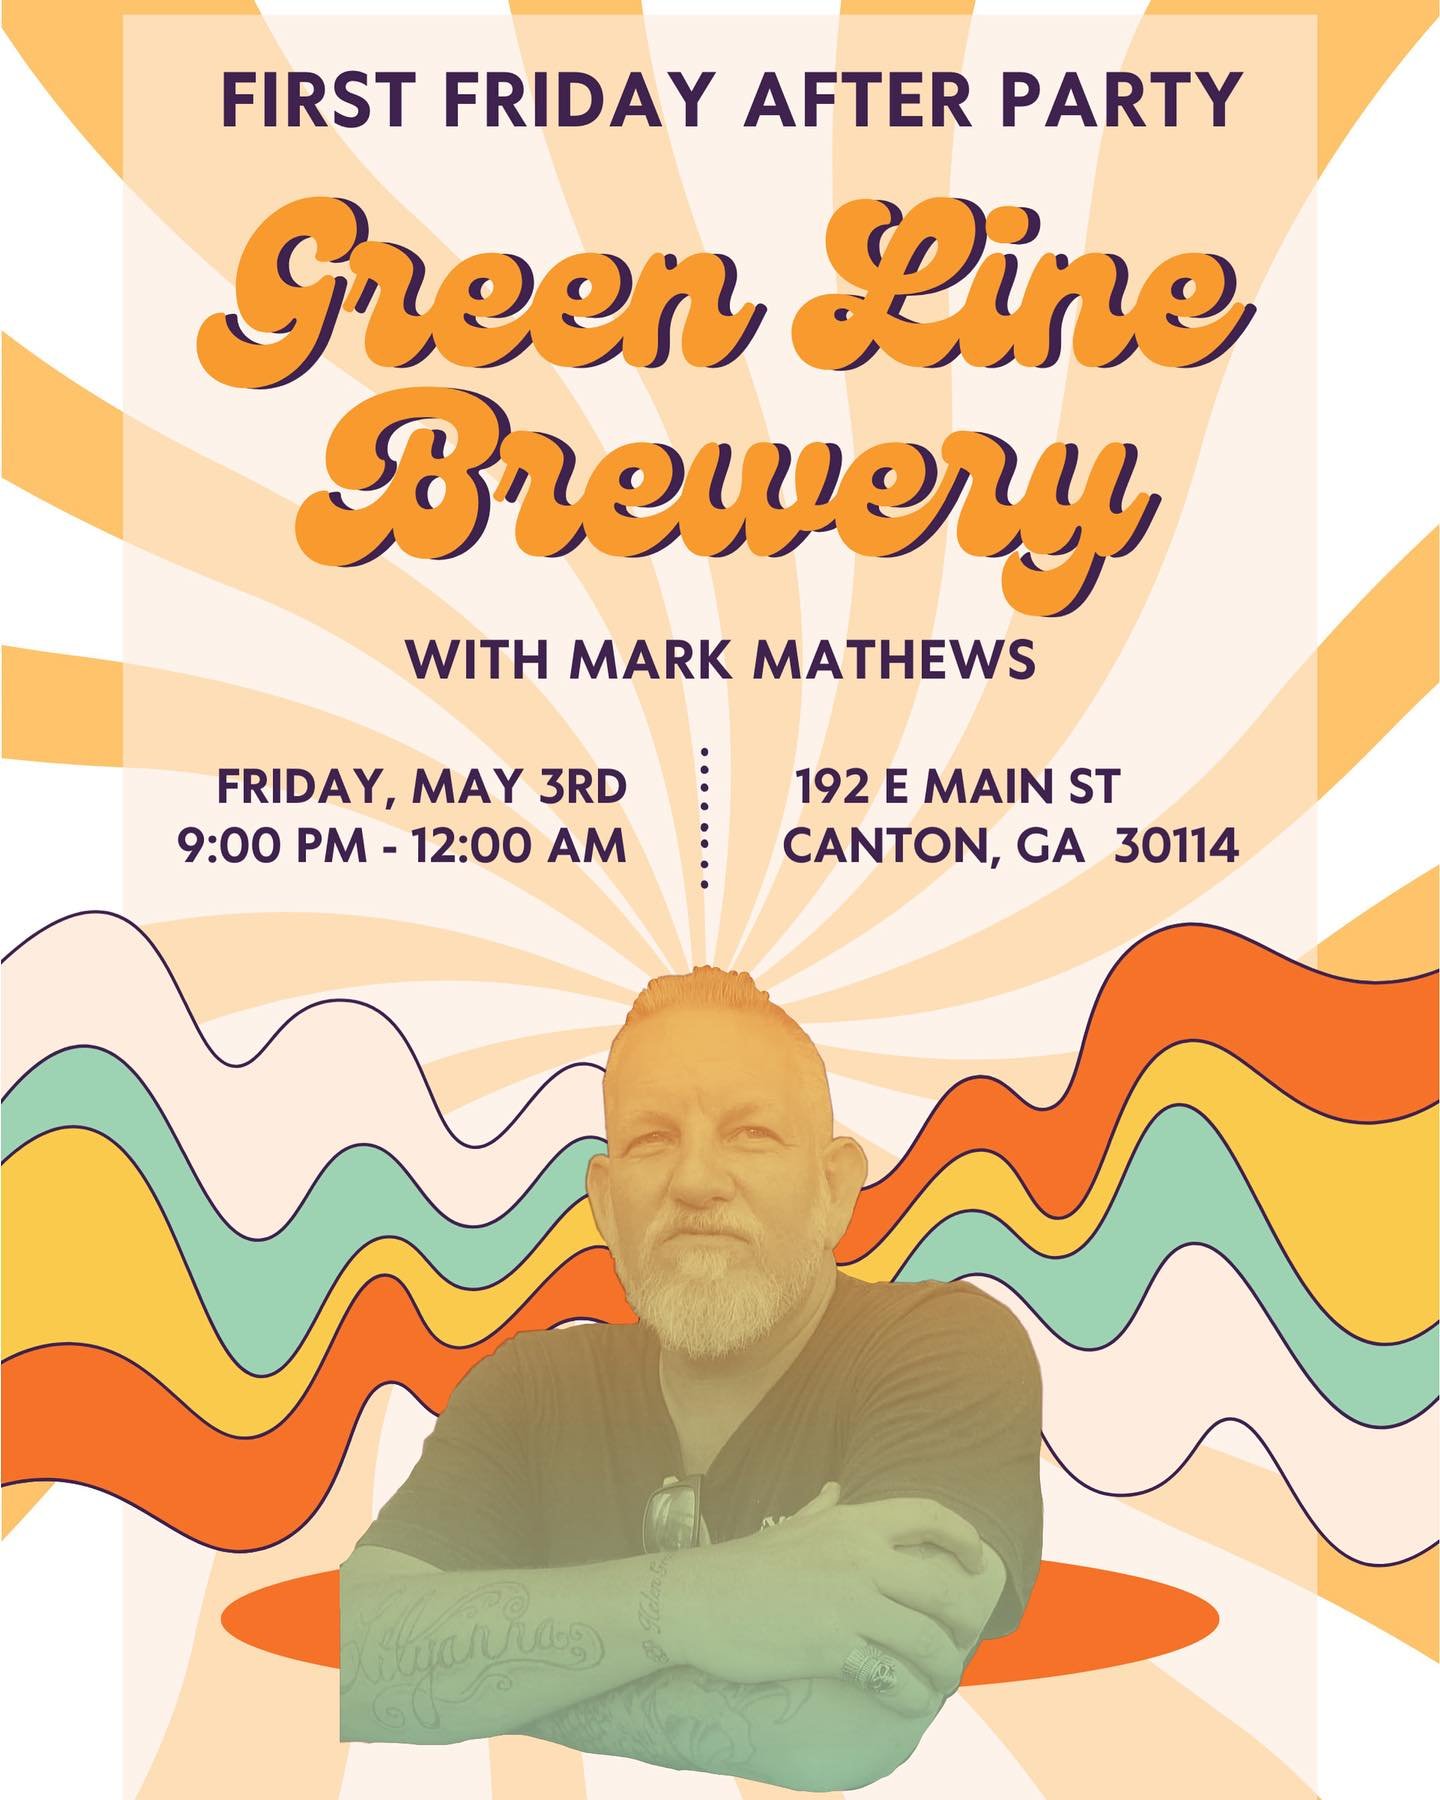 Today&rsquo;s the day!!! We can&rsquo;t wait for FIRST FRIDAY in Downtown Canton, GA! Come see us at one of our tents, and at our AFTER PARTY hosted by @markmathewsmuzic from 9-12 AM!🍻🌞

Gonna be a great night! See y&rsquo;all then! #GREENLINEBREWE